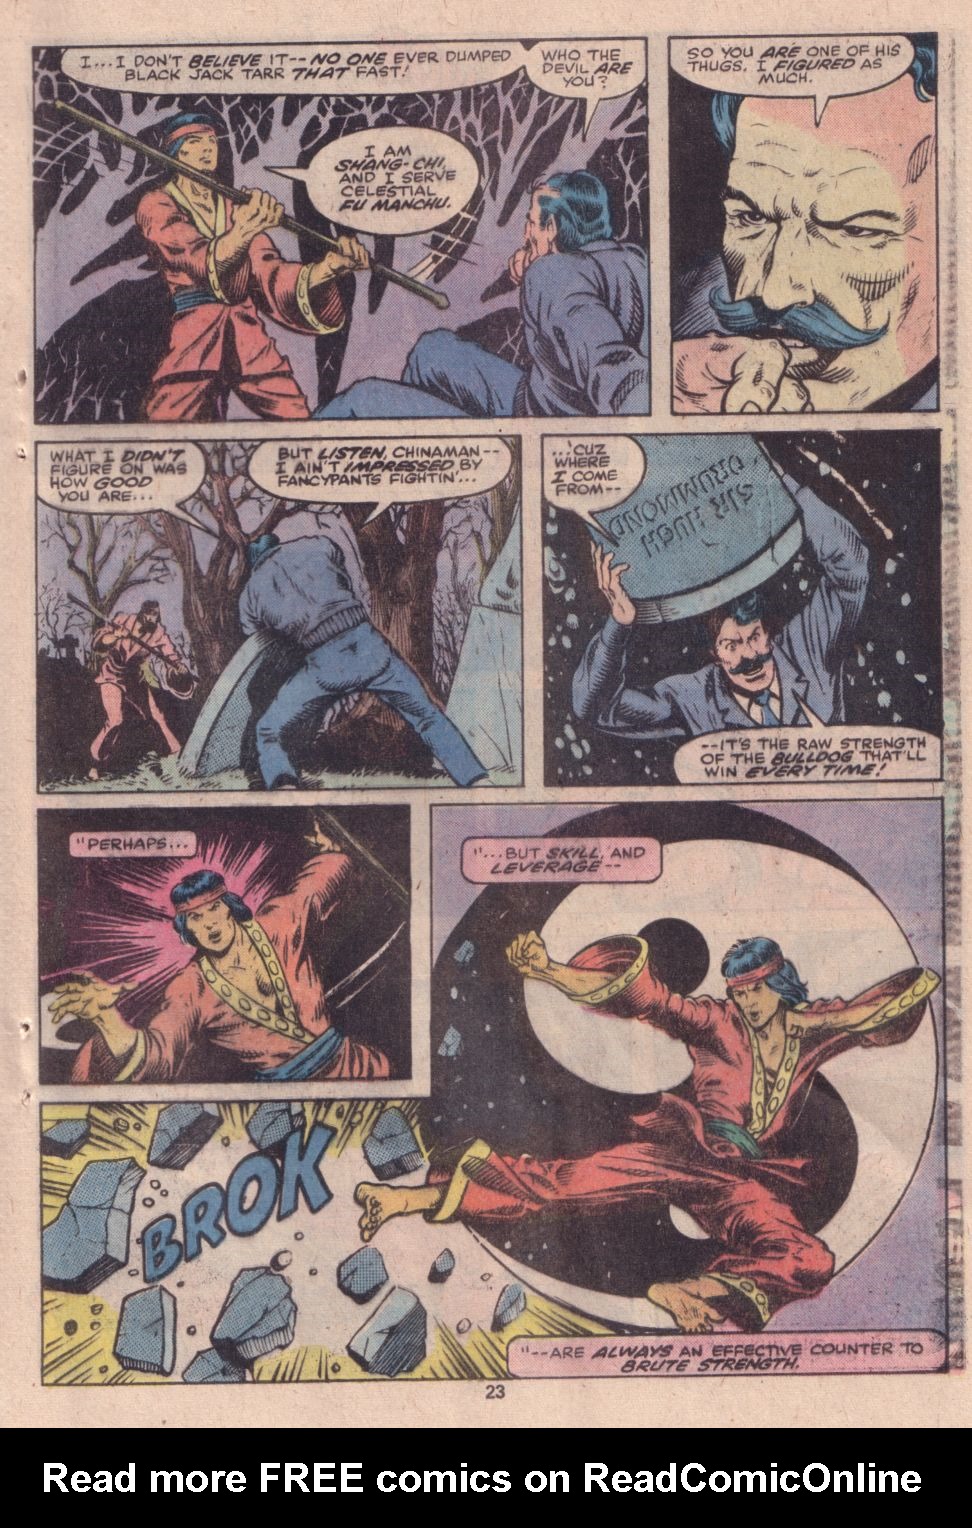 What If? (1977) Issue #16 - Shang Chi Master of Kung Fu fought on The side of Fu Manchu #16 - English 18